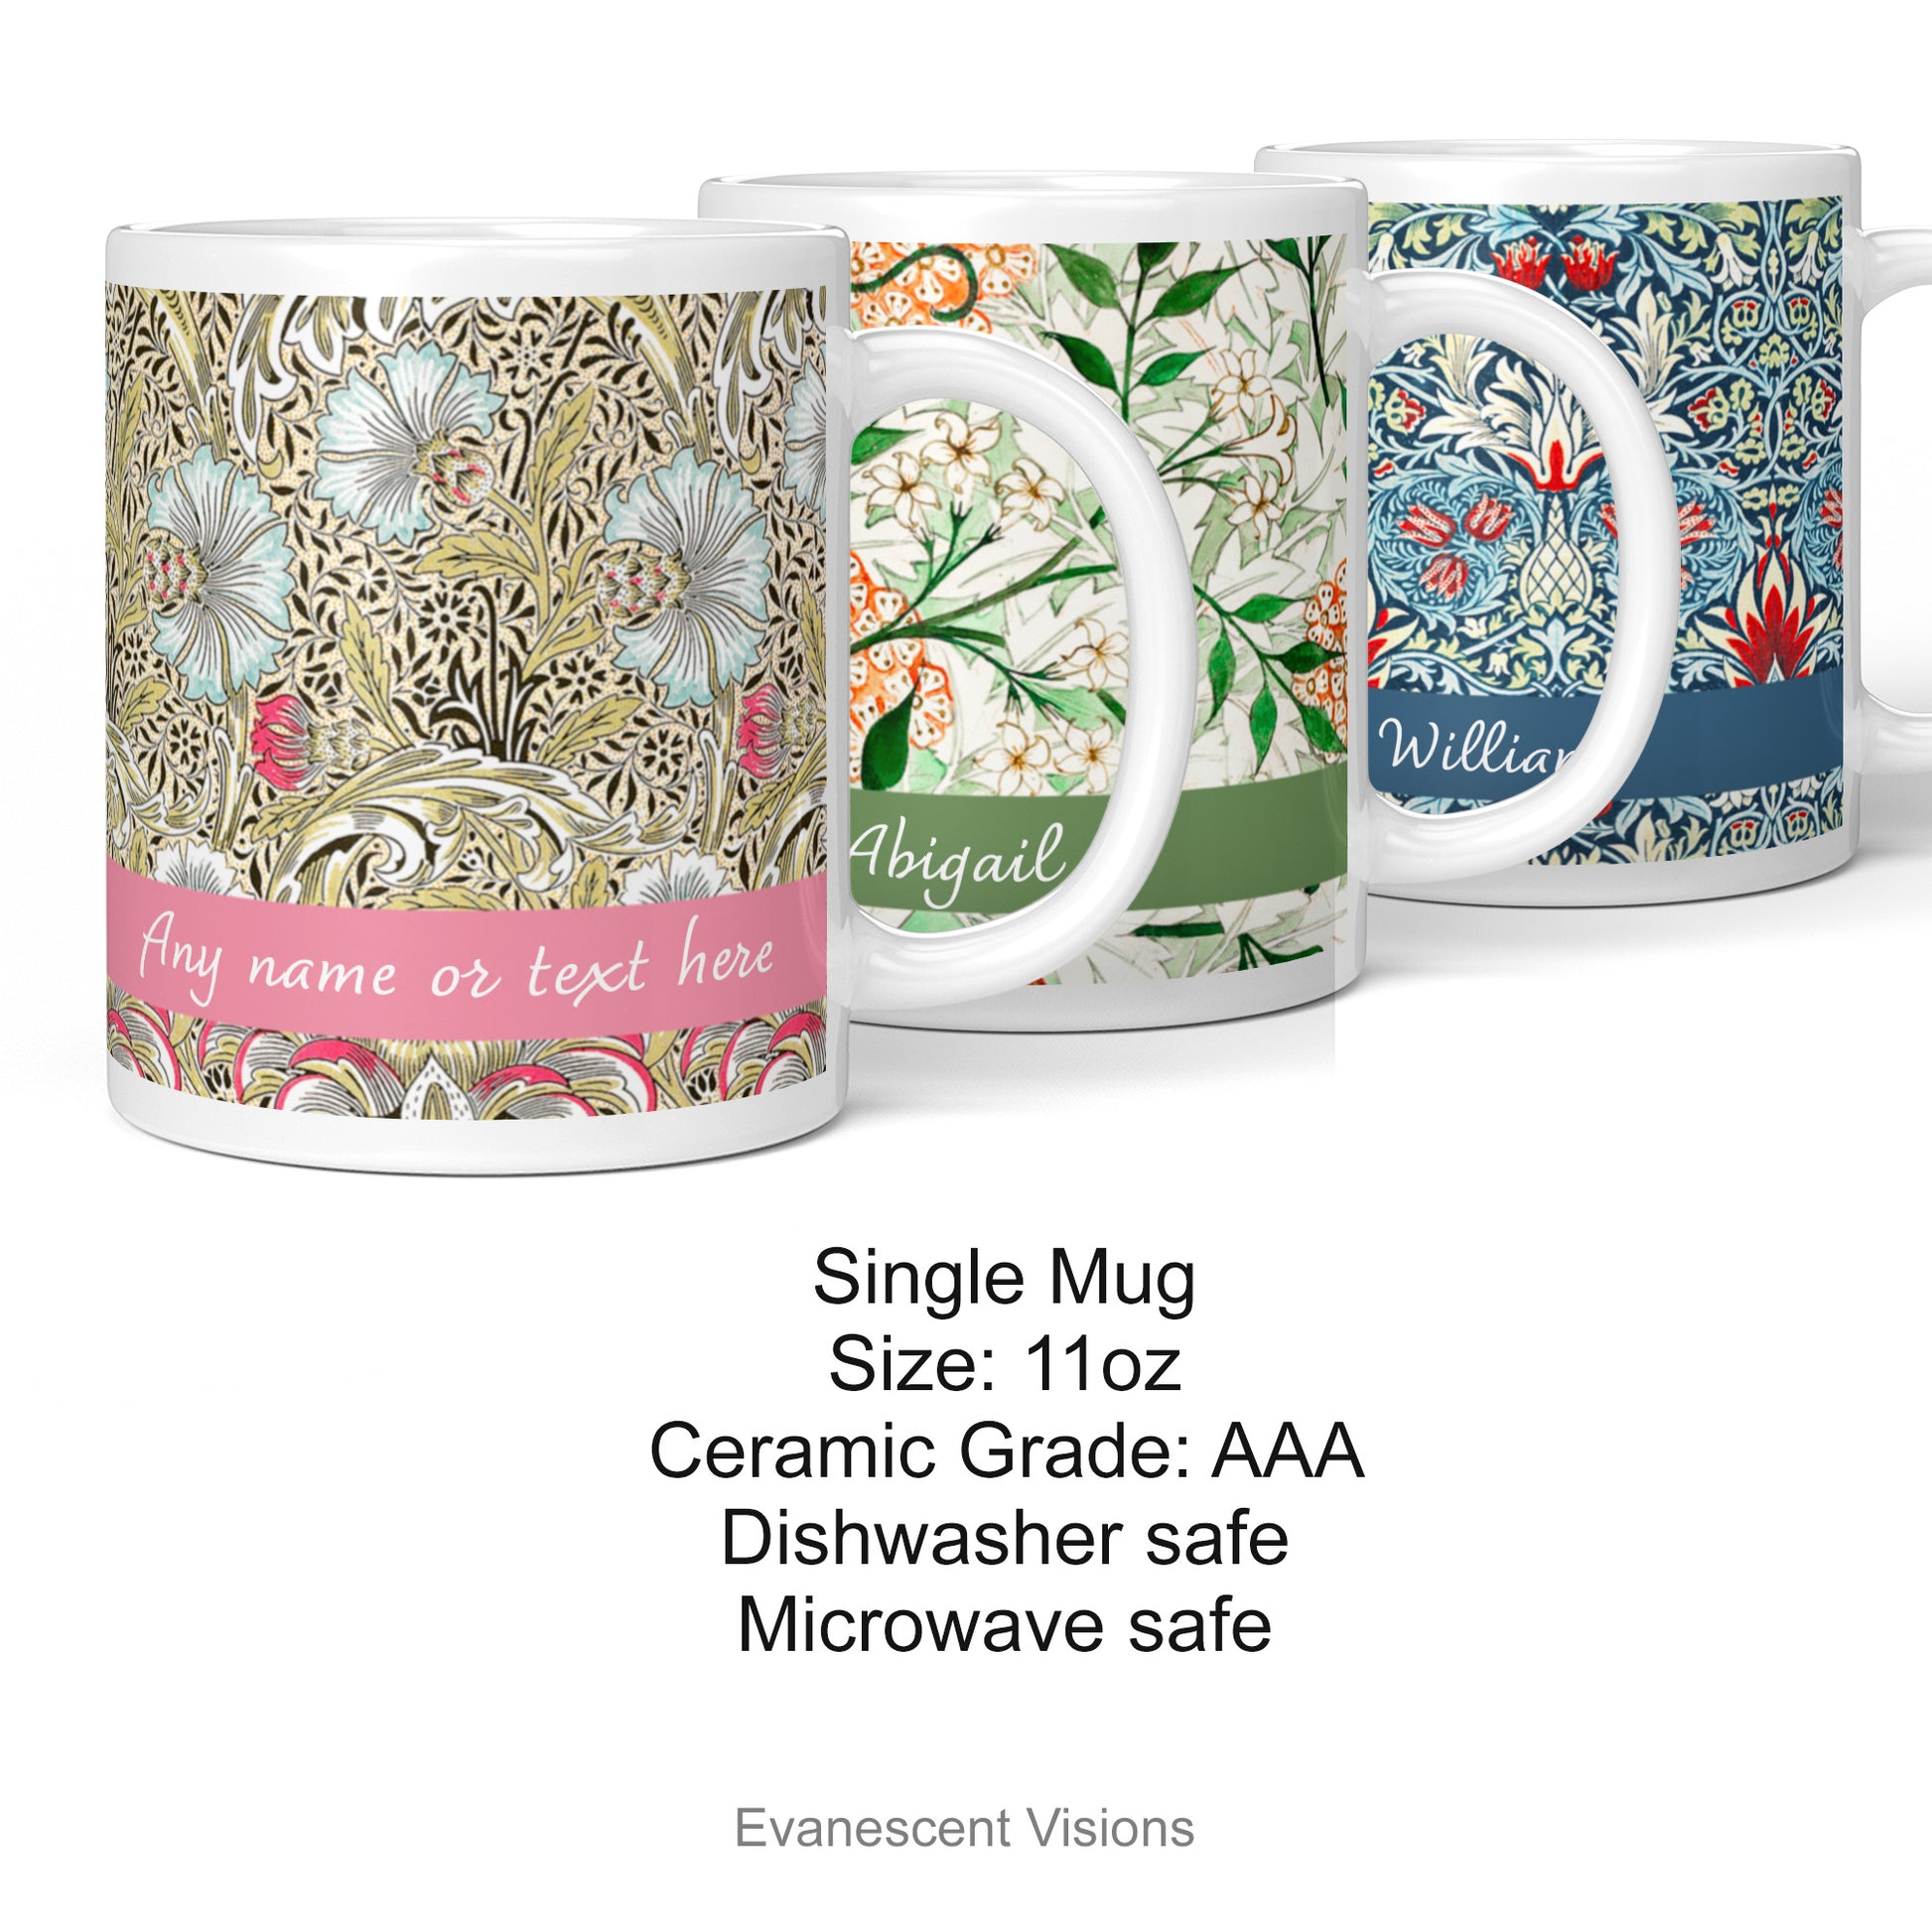 Product details for the Personalised William Morris Patterned mugs